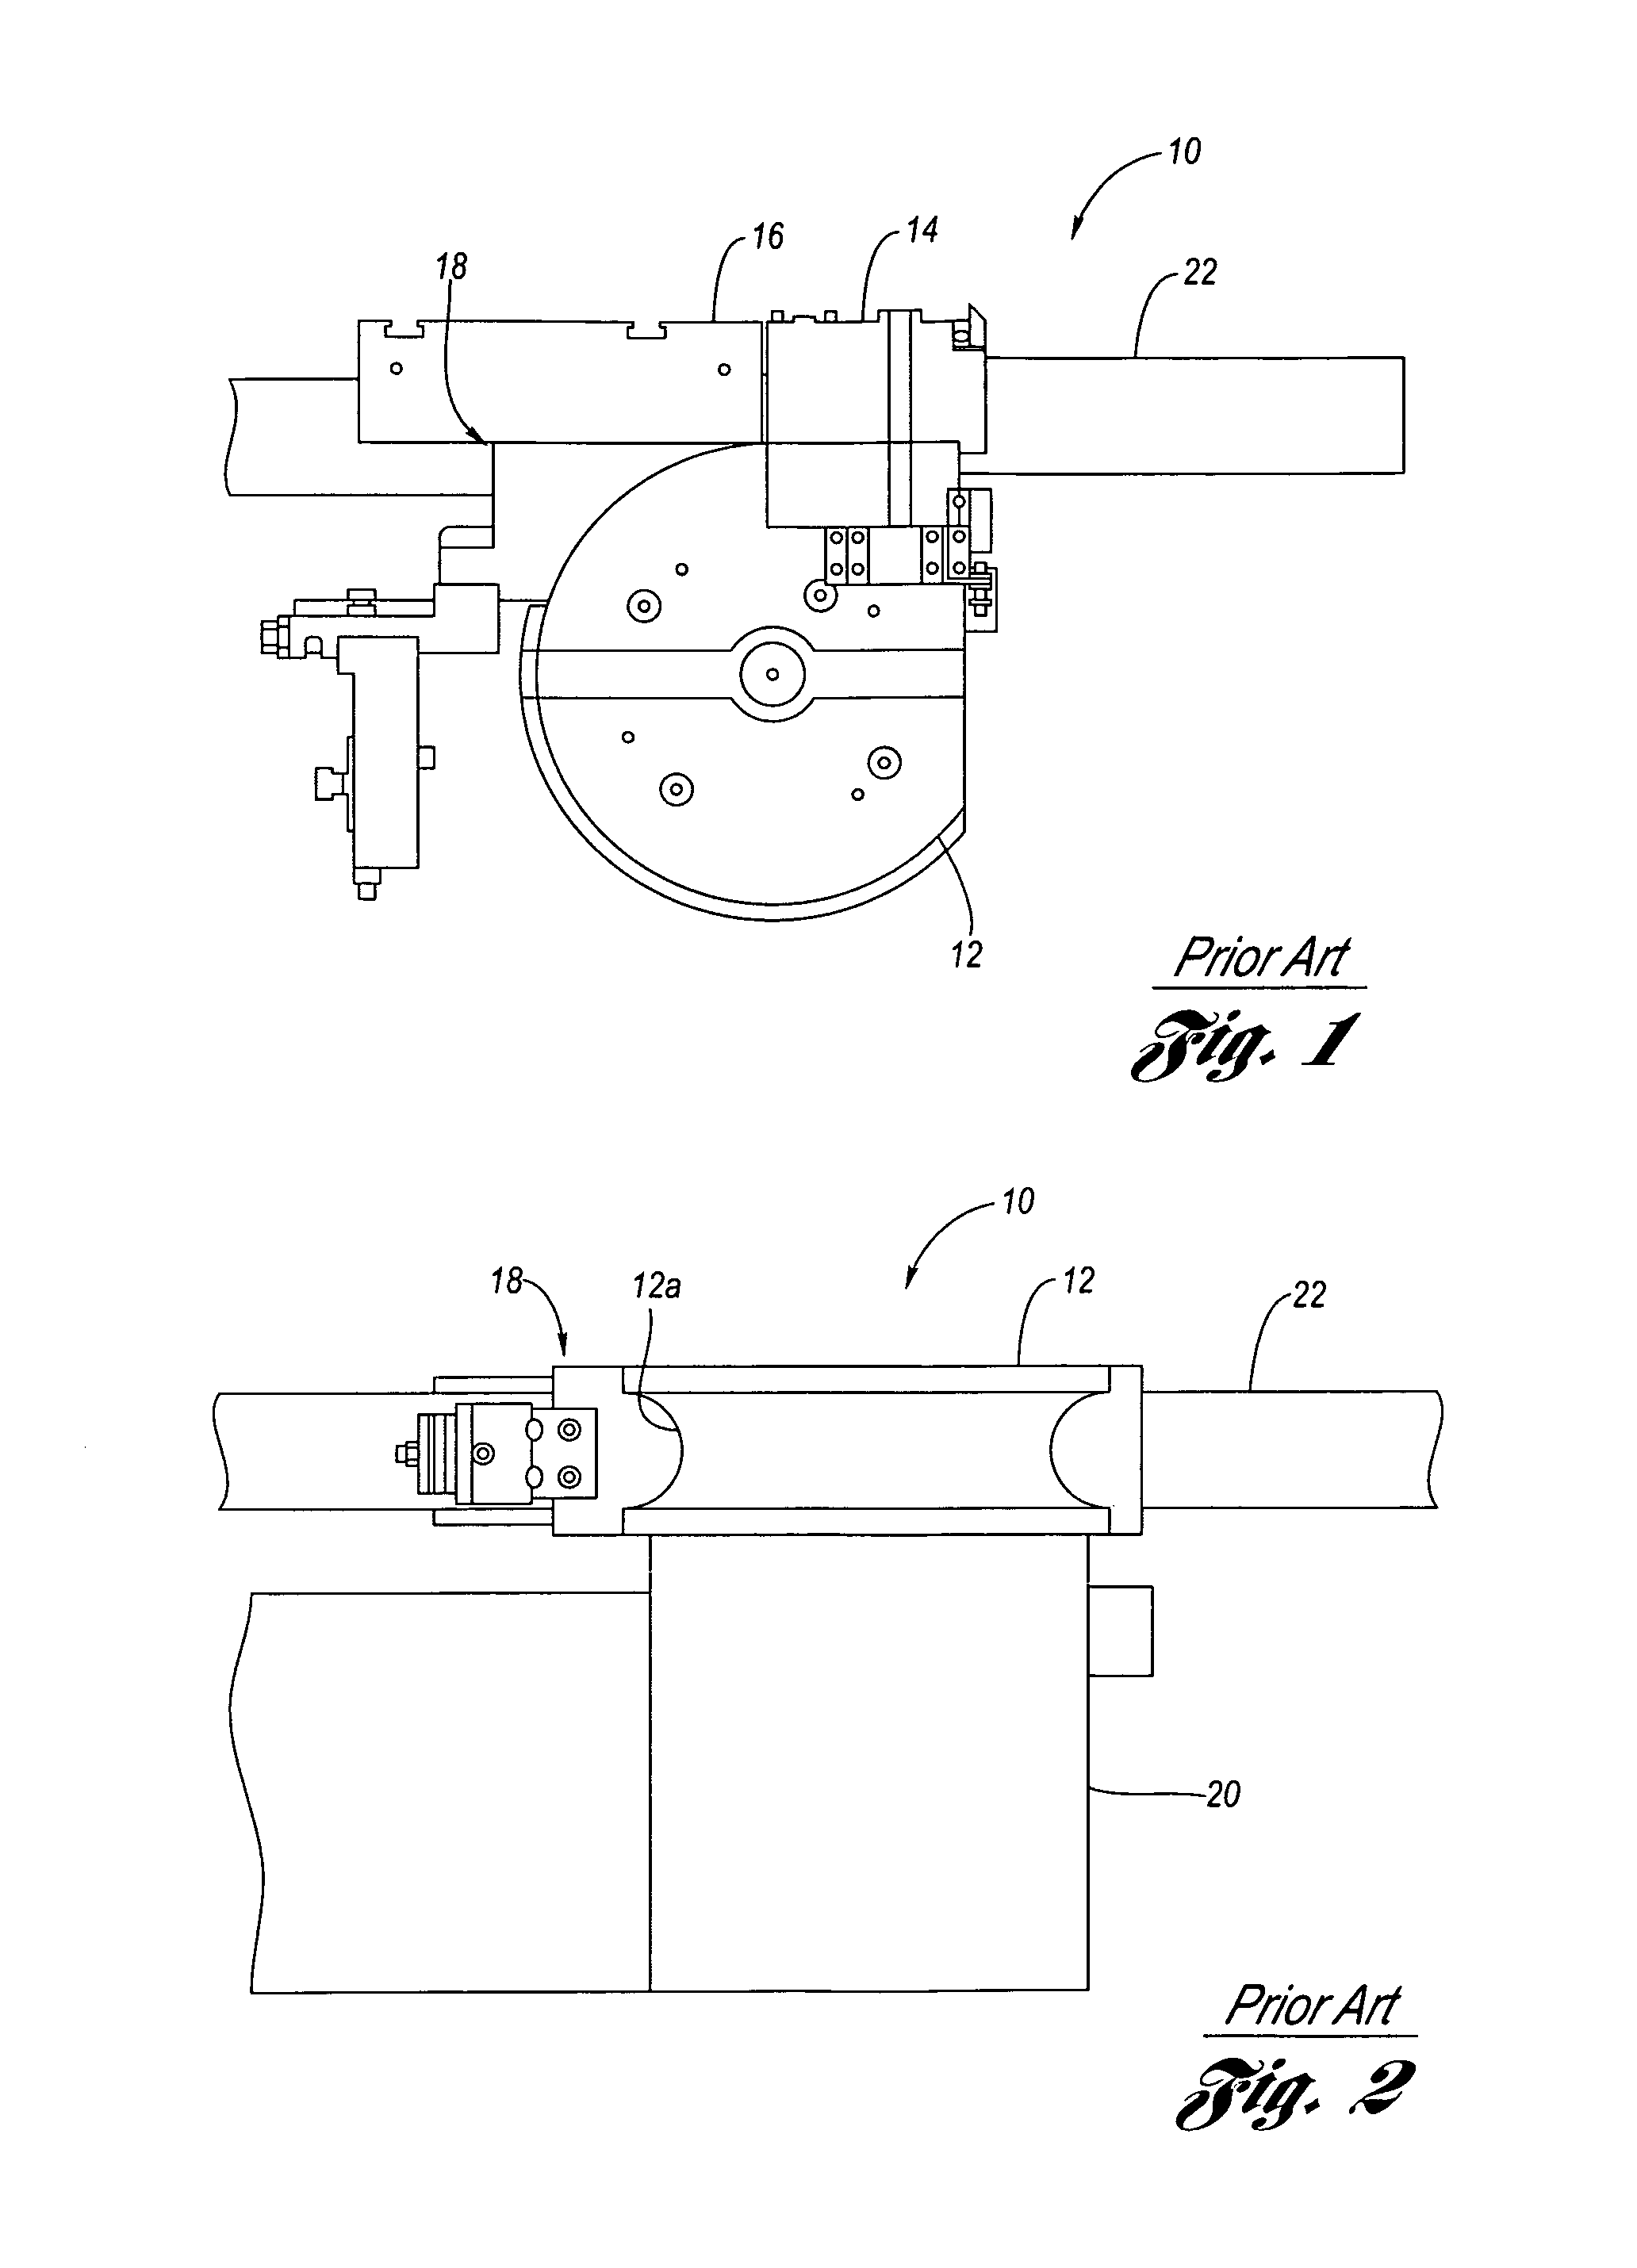 Apparatus for wiper die monitoring